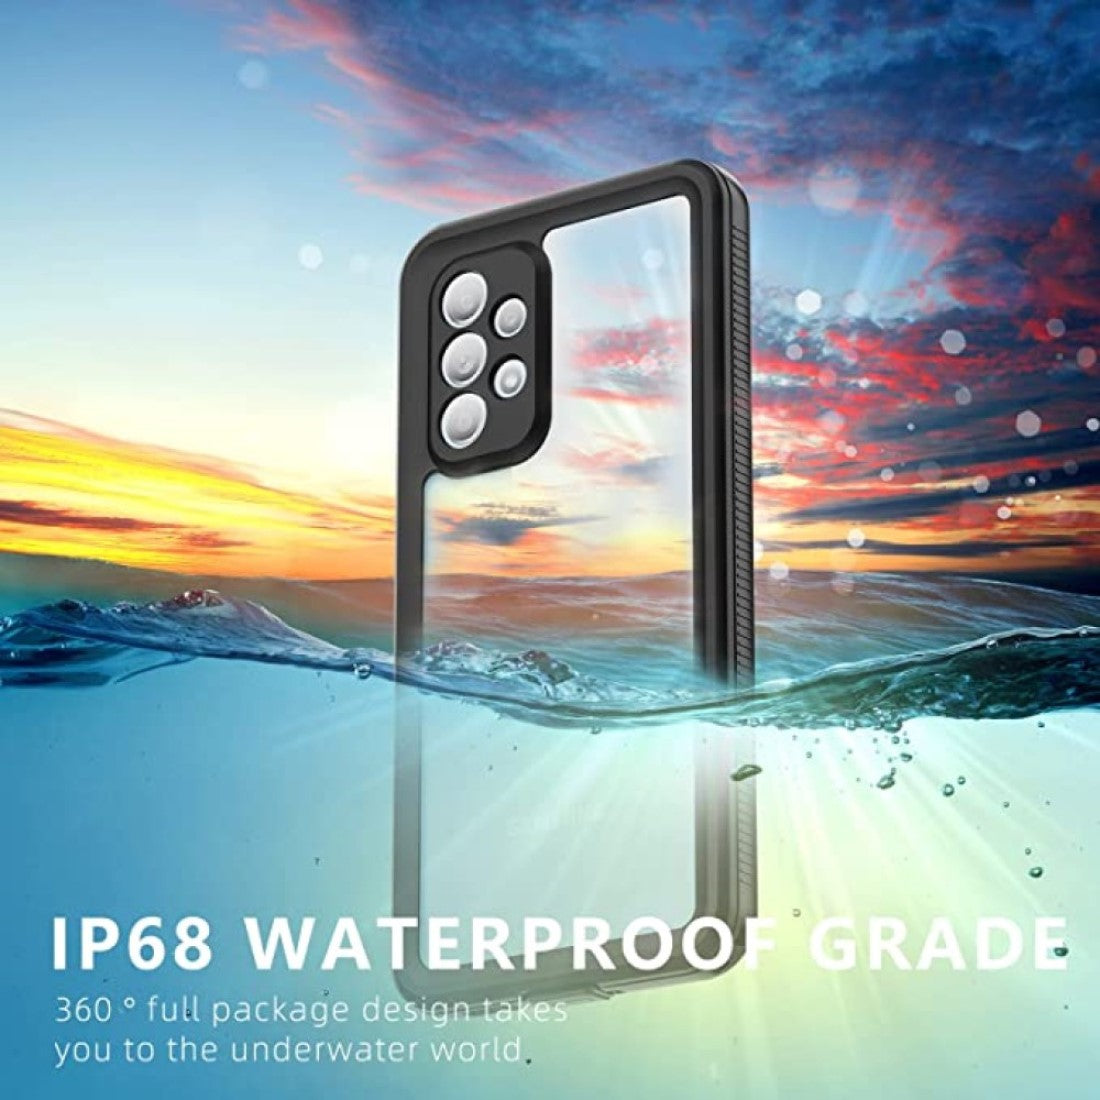 Waterproof Slim Life Proof Case for Samsung Note 10 Plus Built-in Screen Protector Shockproof Dustproof Heavy Duty Full Body Protective Case